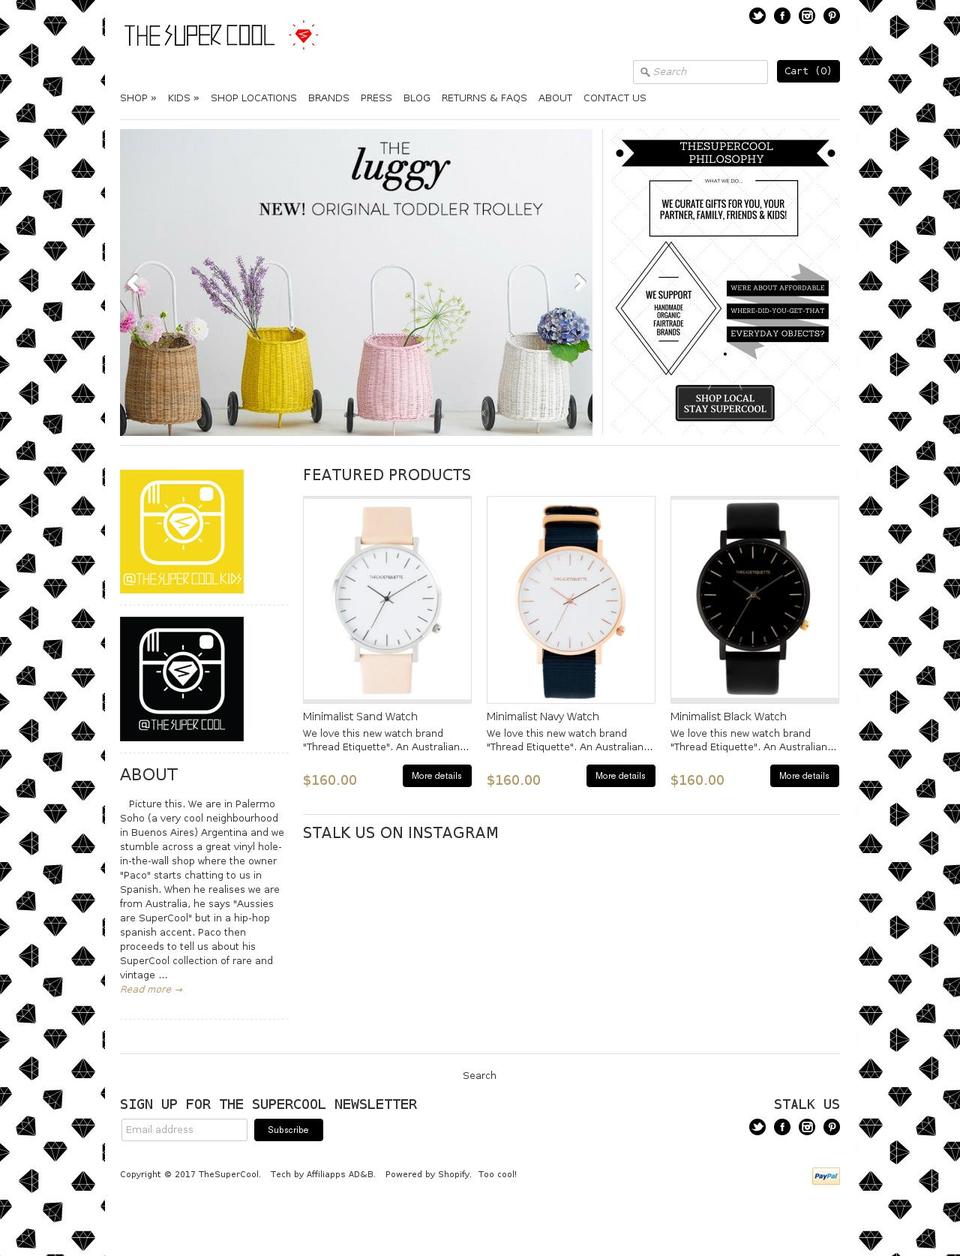 Loft Shopify theme site example thesupercool.com